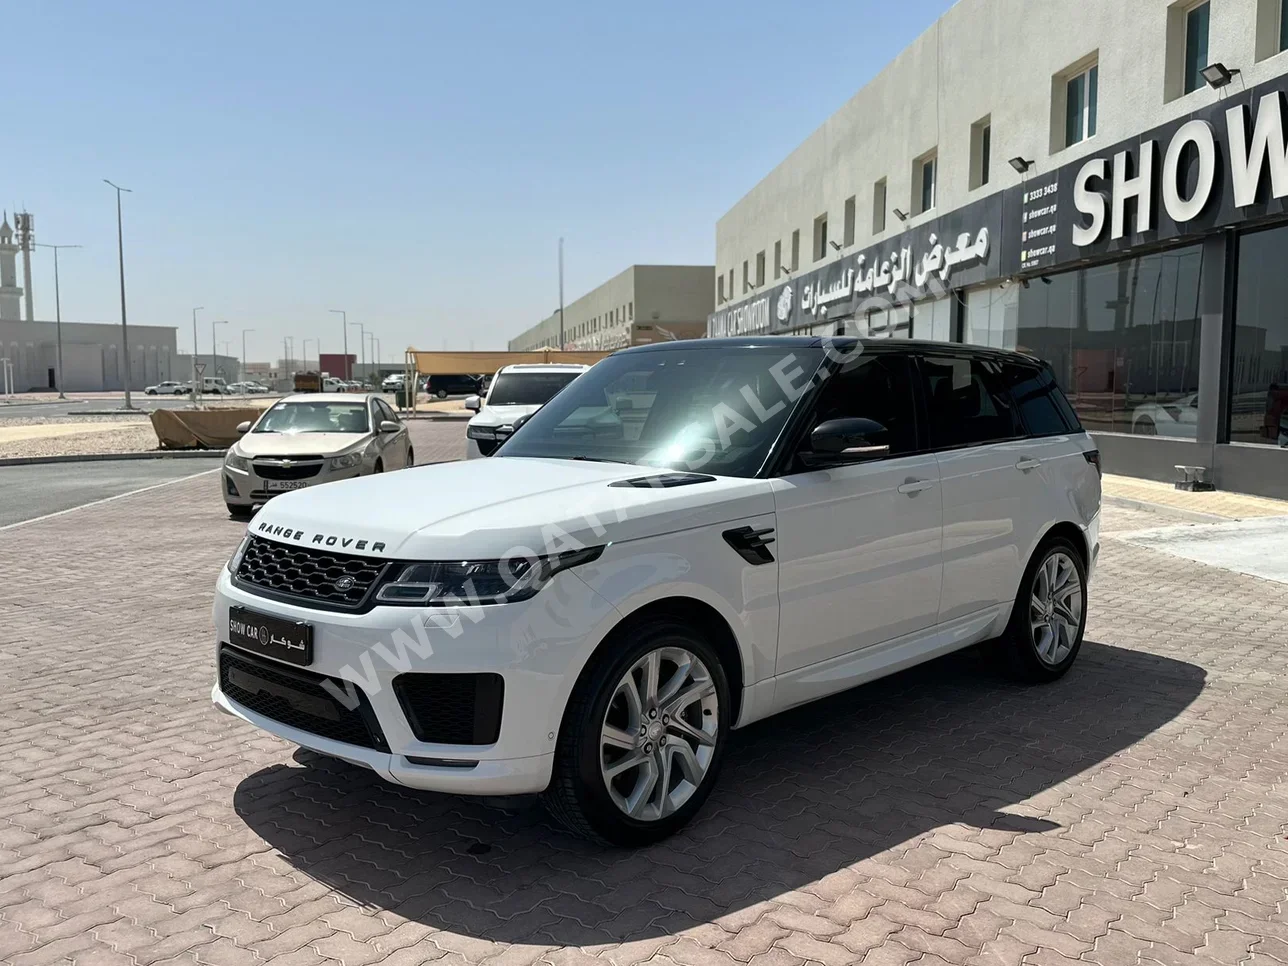 Land Rover  Range Rover  Sport Super charged  2022  Automatic  84,000 Km  6 Cylinder  Four Wheel Drive (4WD)  SUV  White  With Warranty